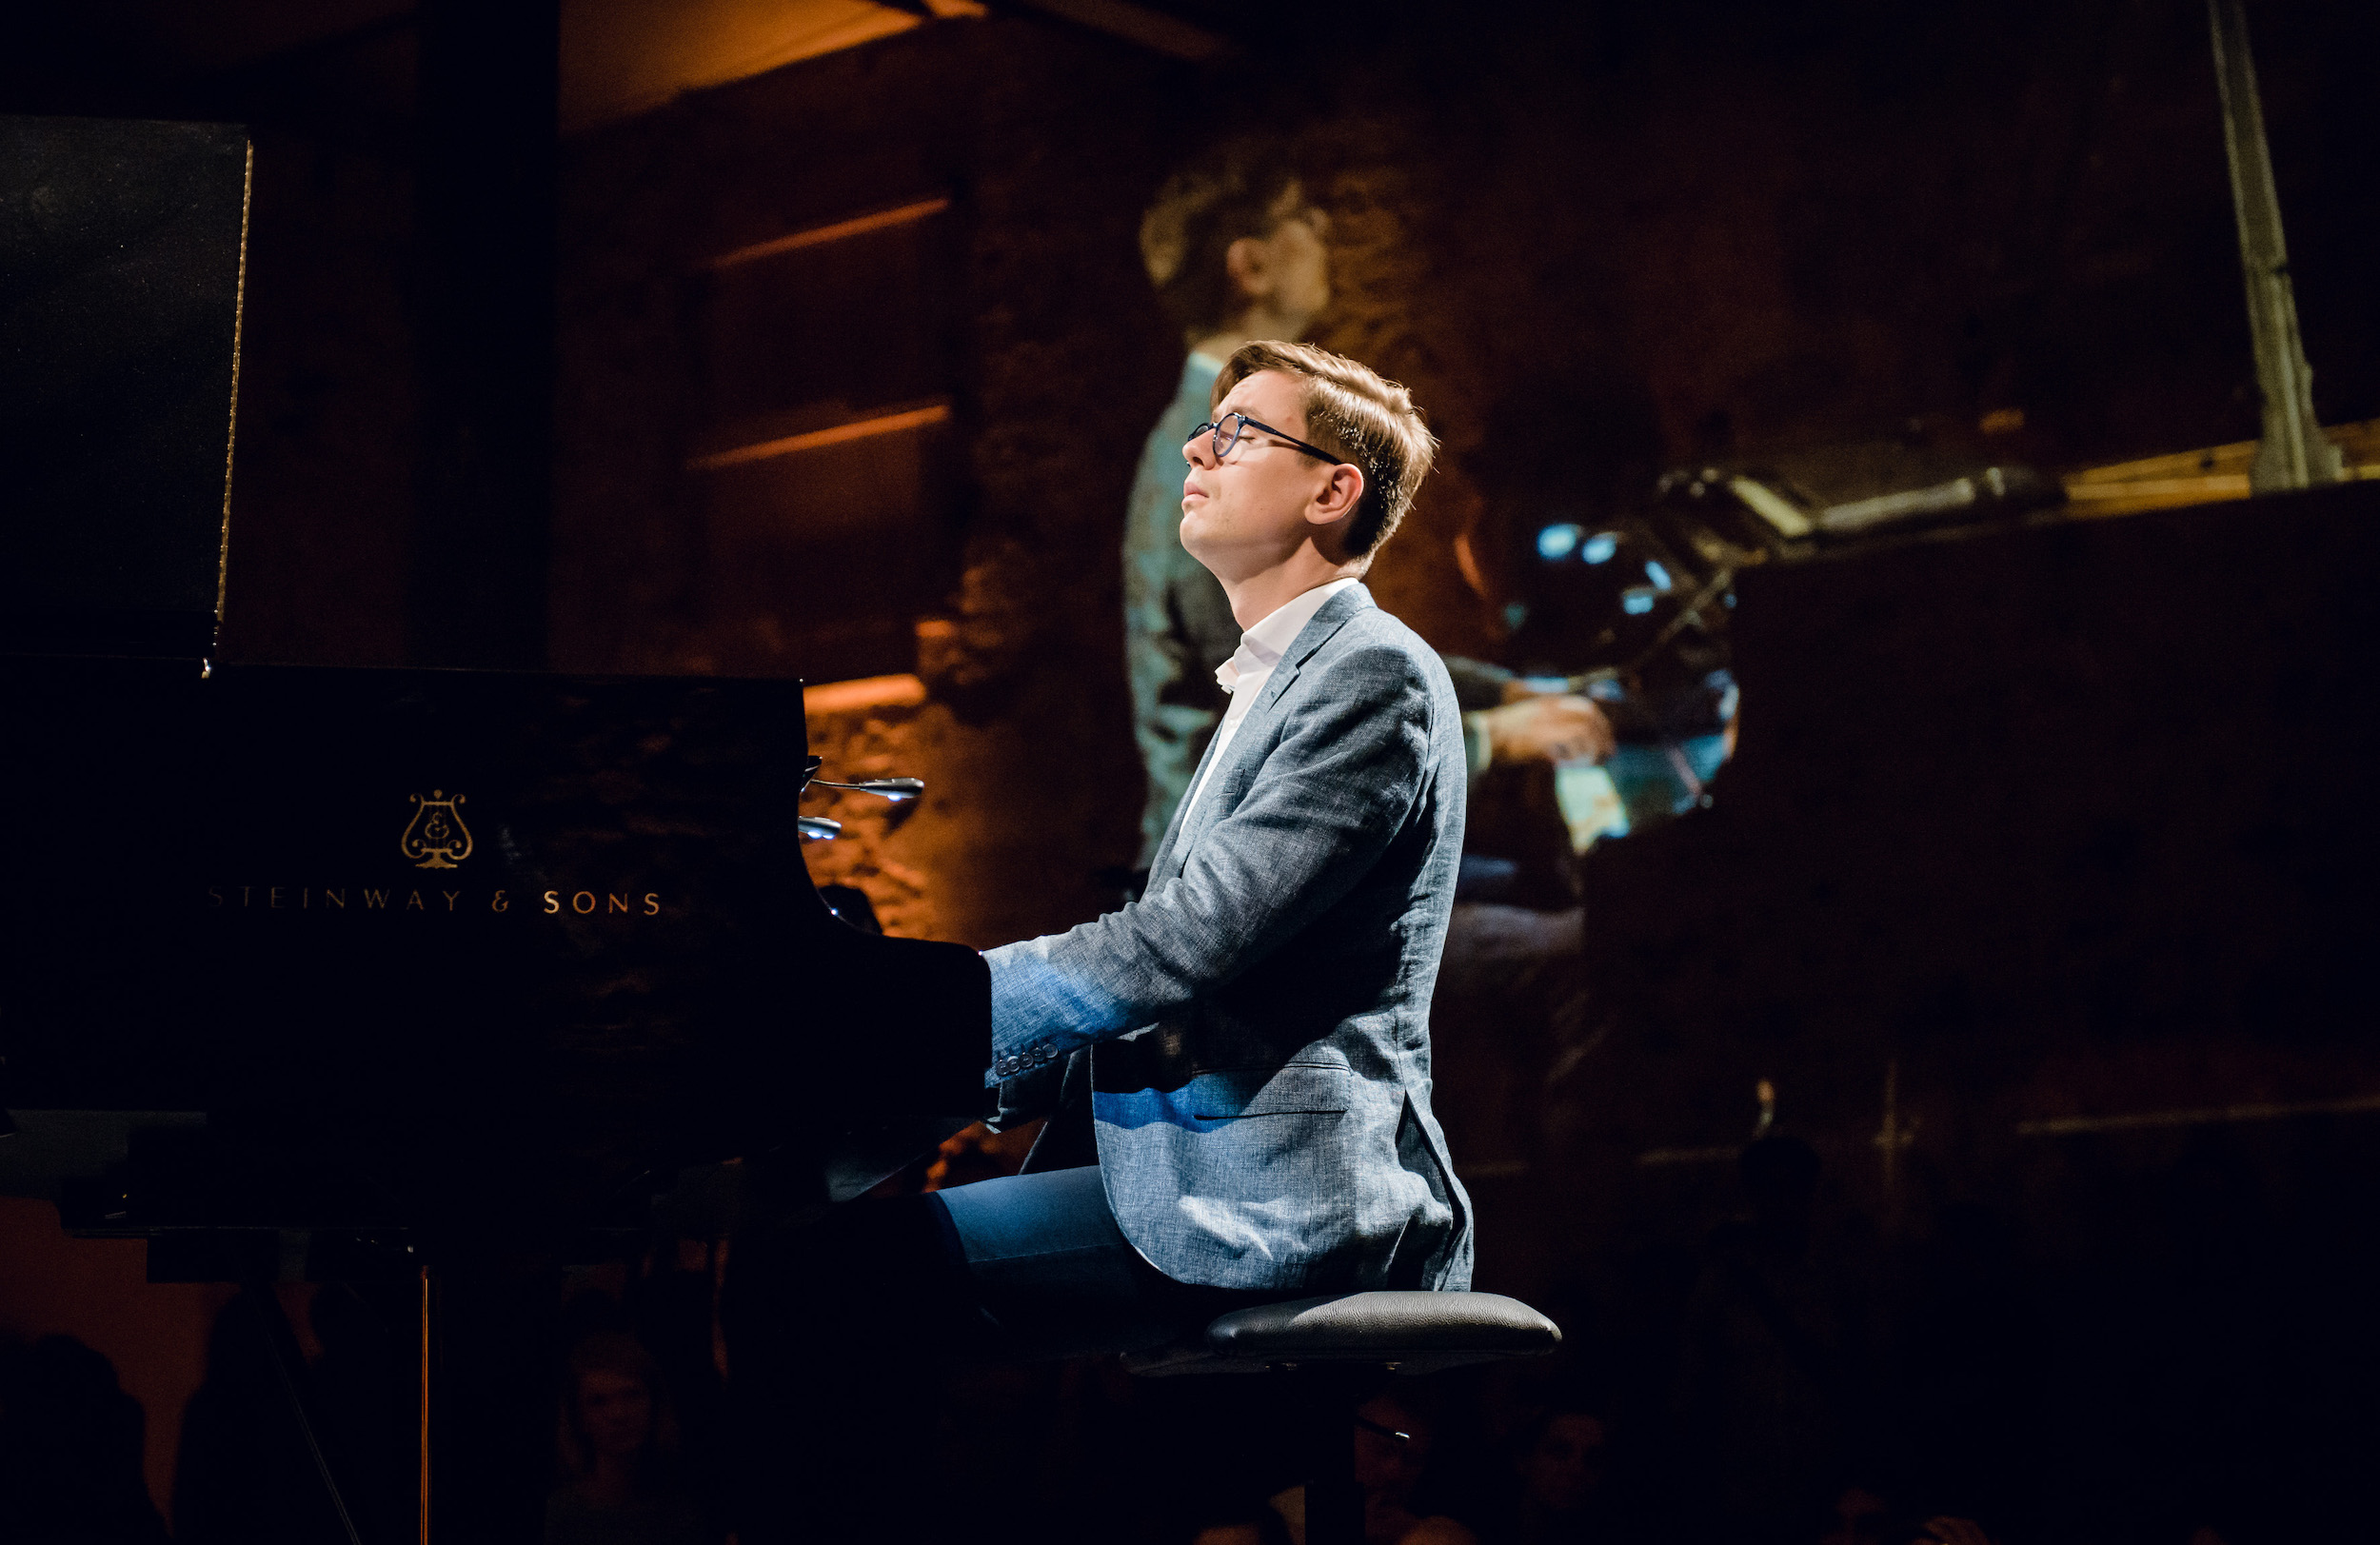 Pianist Vikingur Olafsson performs at a concert in 2018.